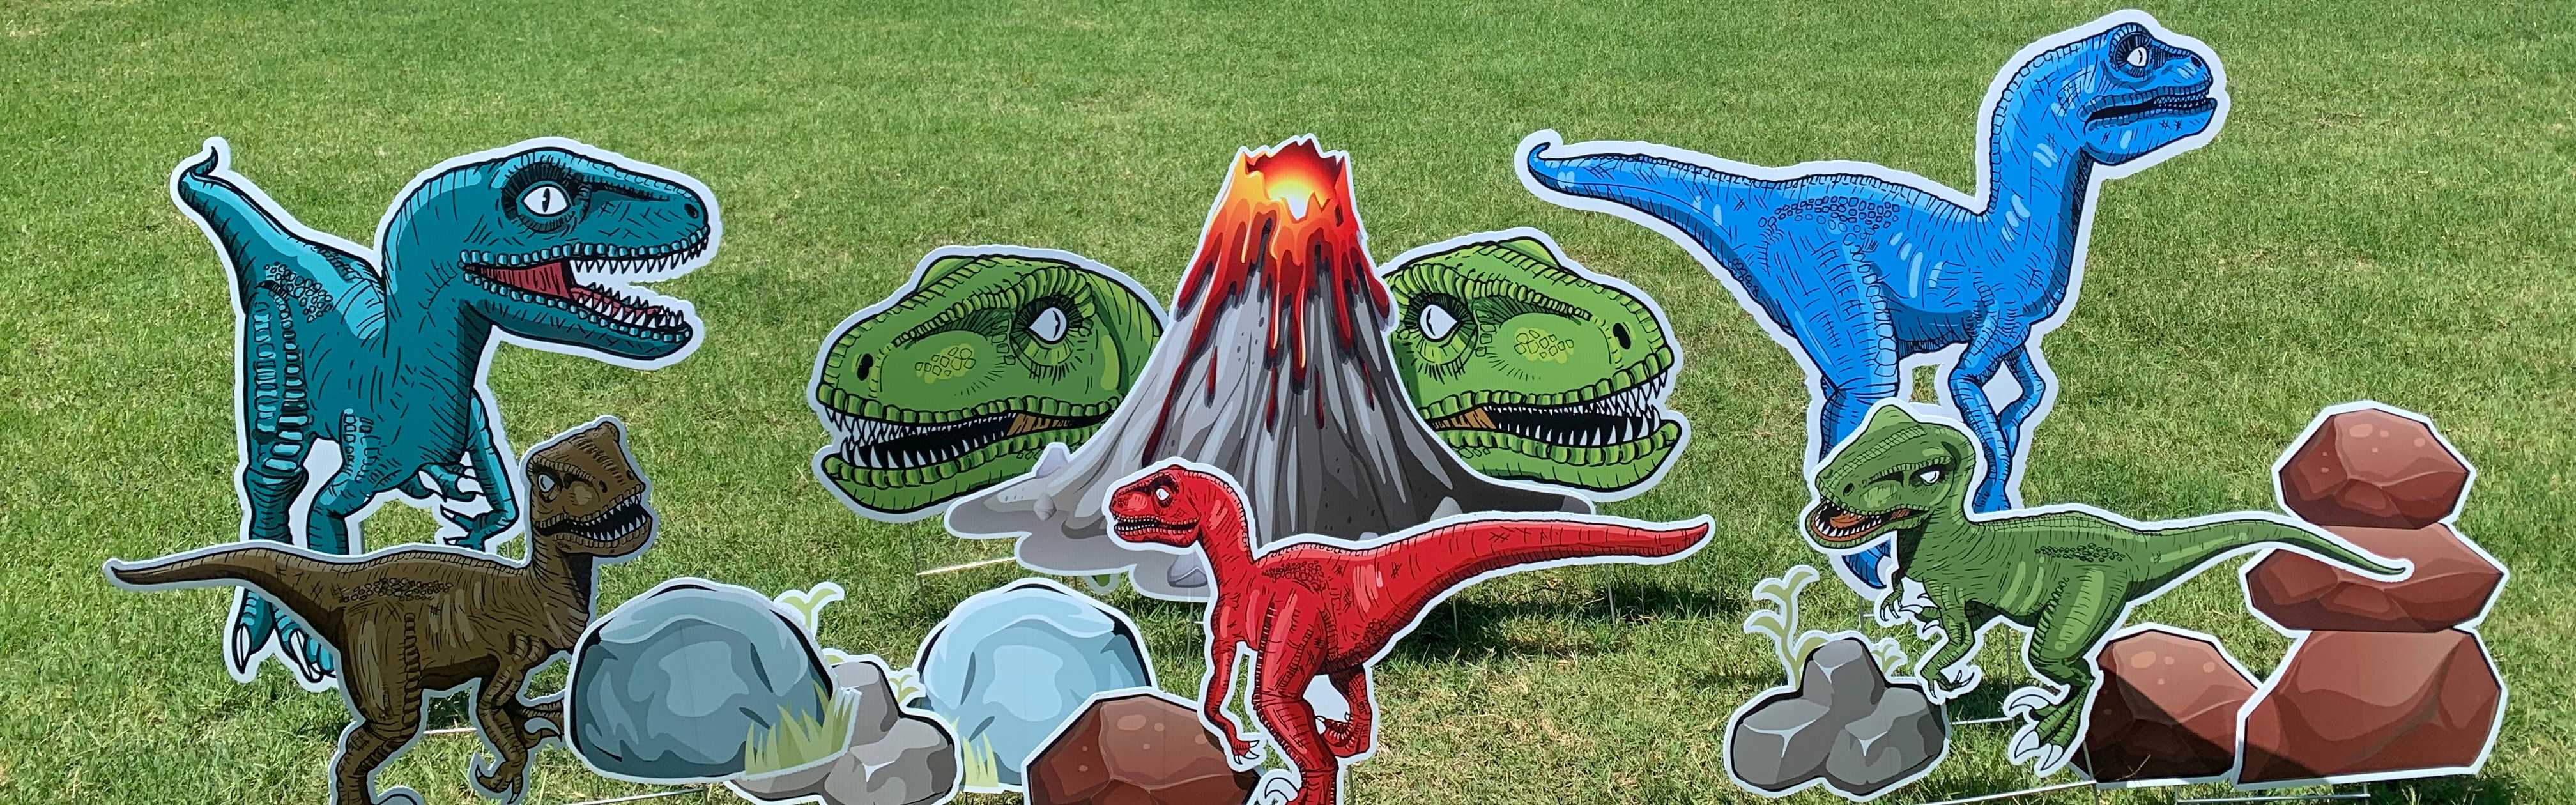 Yard card sign collection dinosaurs 